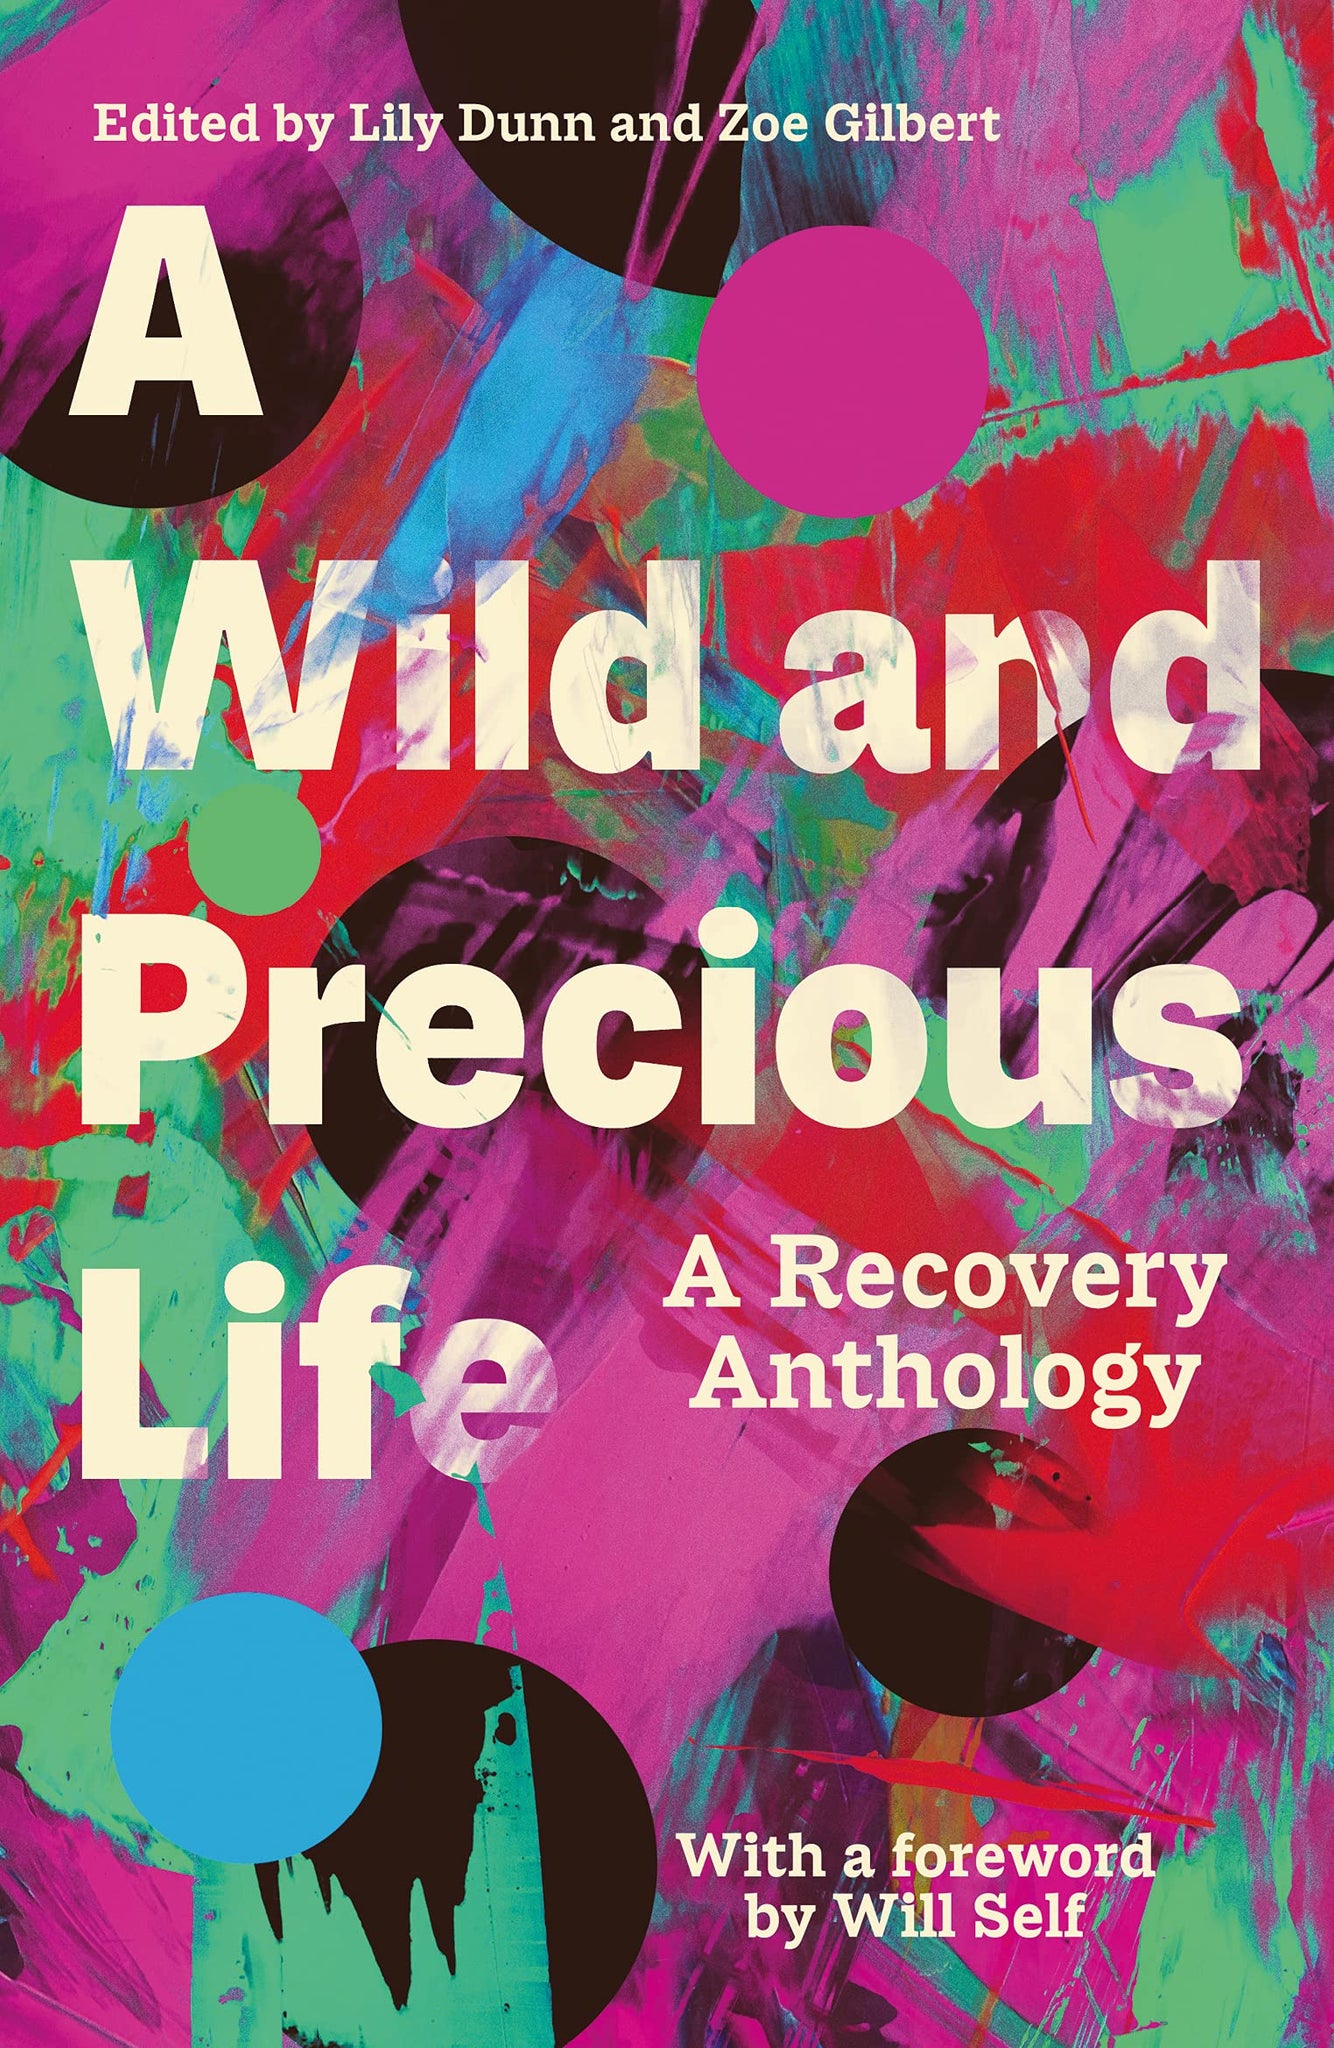 A Wild and Precious Life : A Recovery Anthology by Lily Dunn